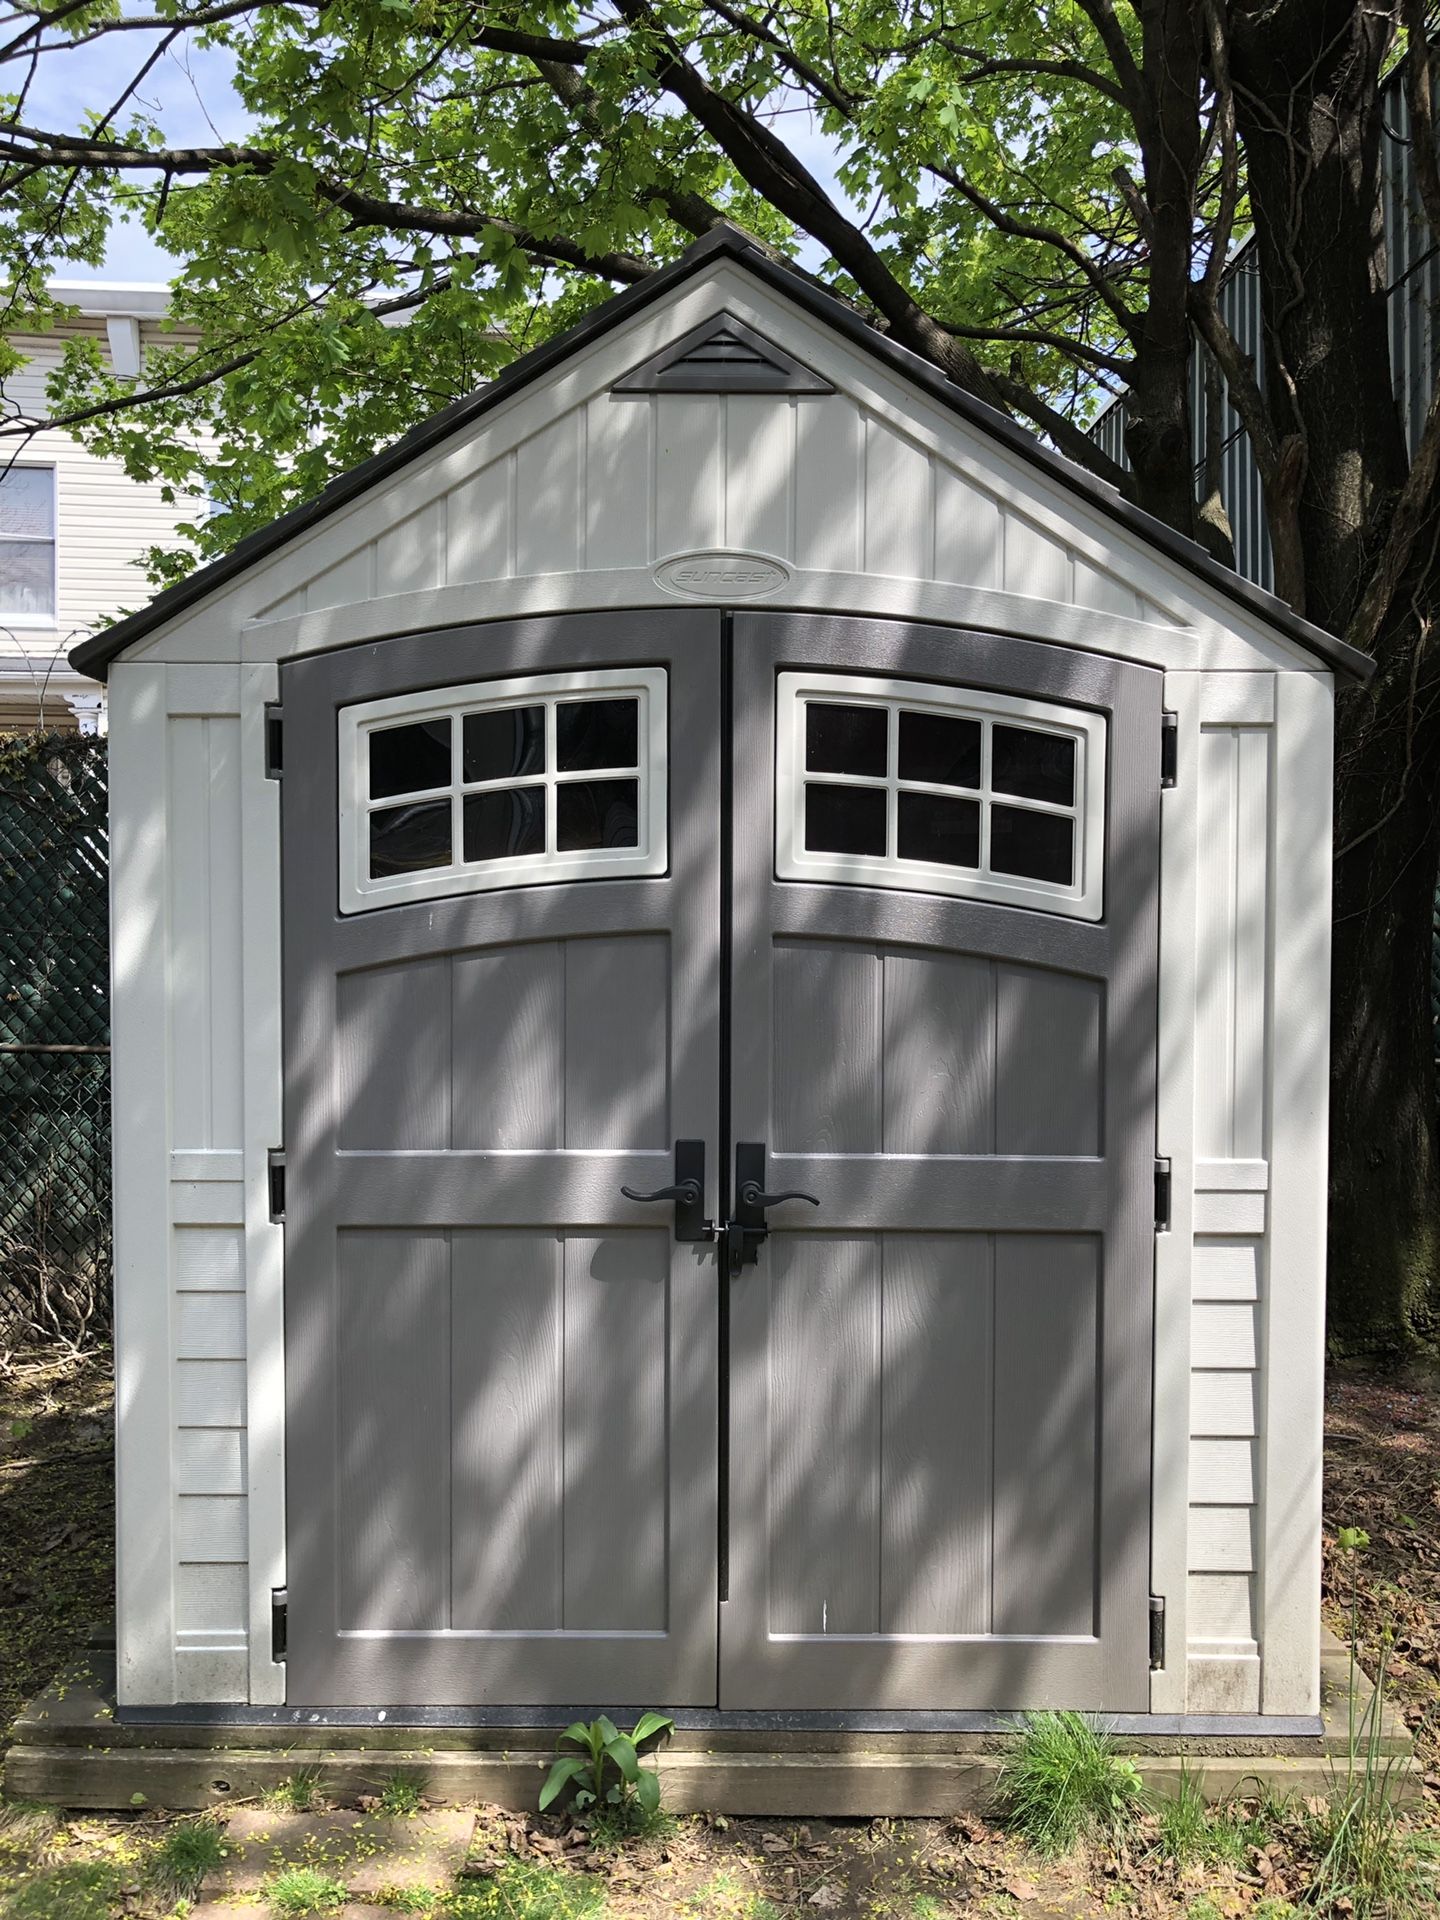 1250$ Suncast 7' x 7' Cascade Storage Shed - Outdoor Storage for Backyard Tools and Accessories - All-Weather Resin Material, Transom Windows and Sh